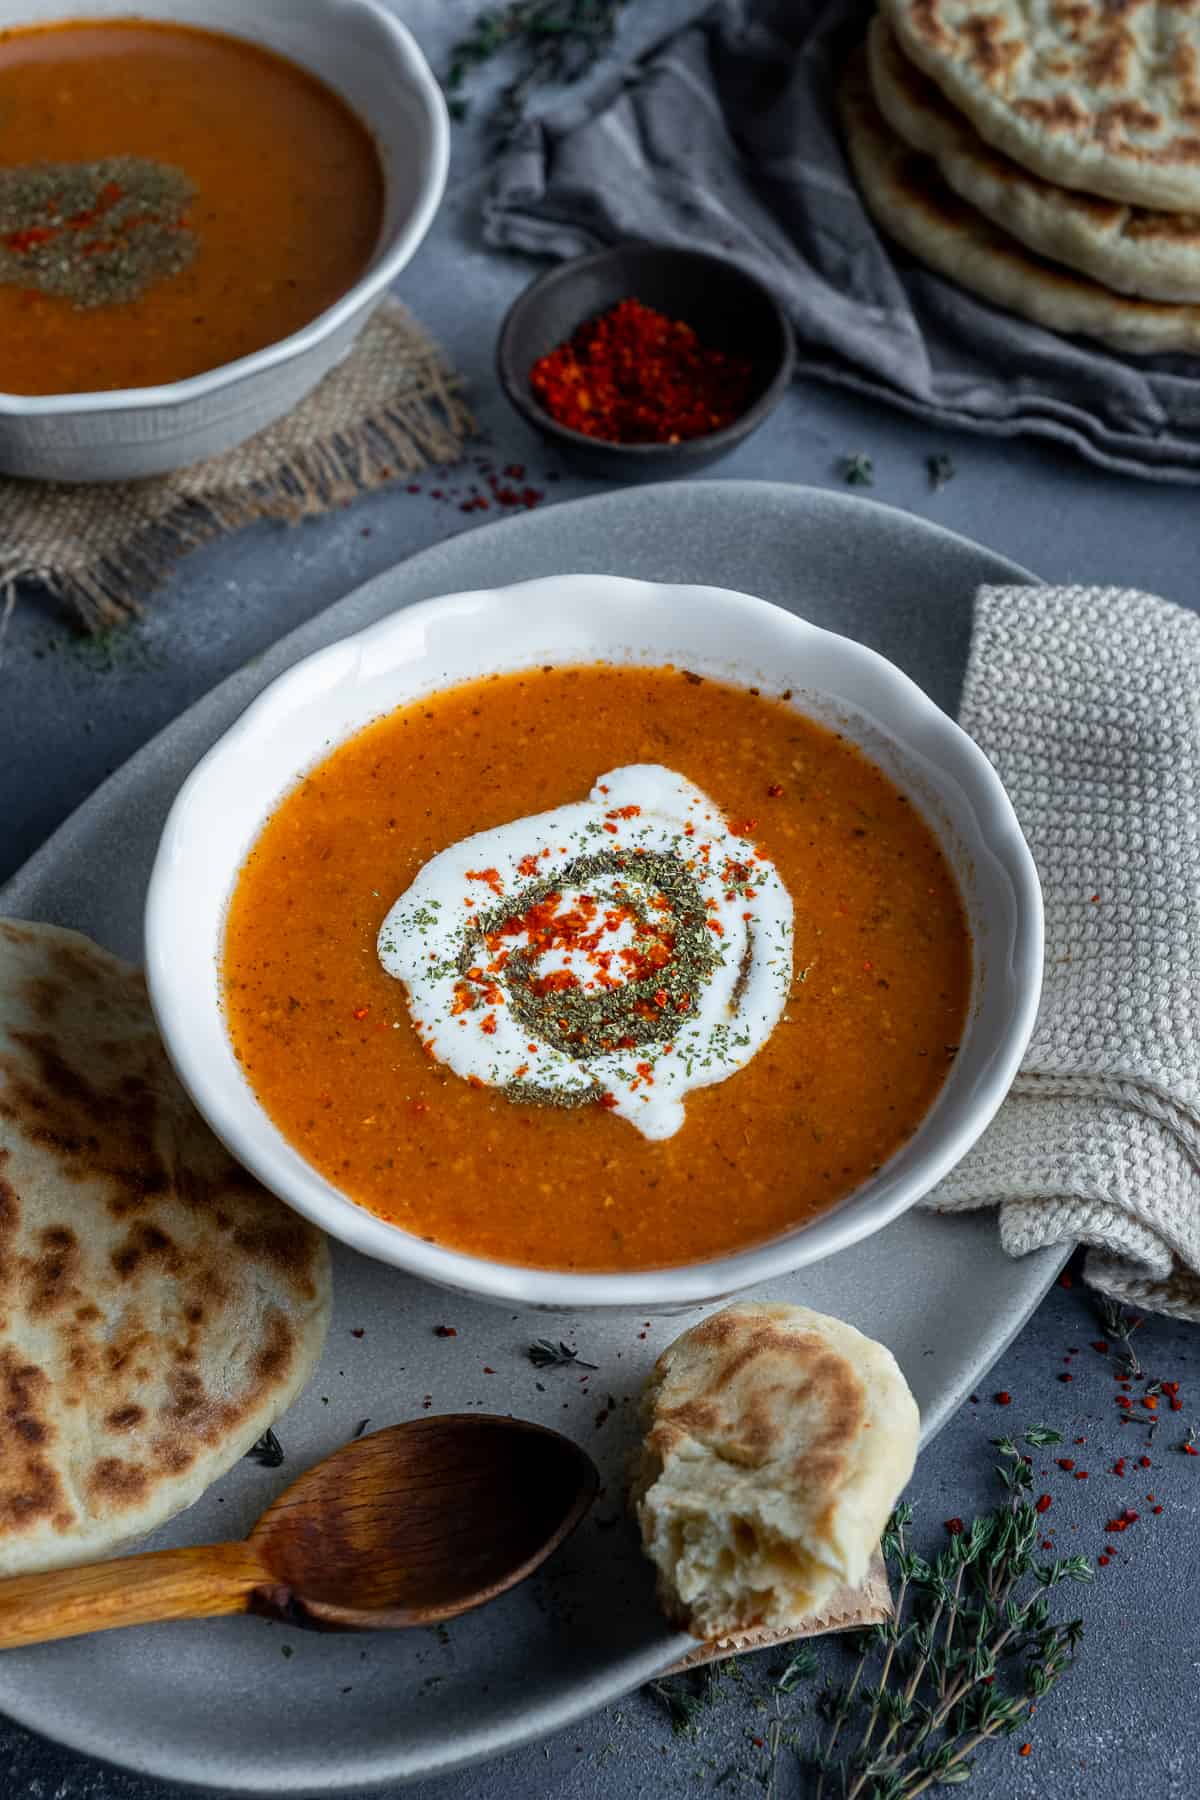 Tarhana soup topped with yogurt, dried mint and red pepper flakes in a white bowl, some flat bread and a wooden spoon accompany.